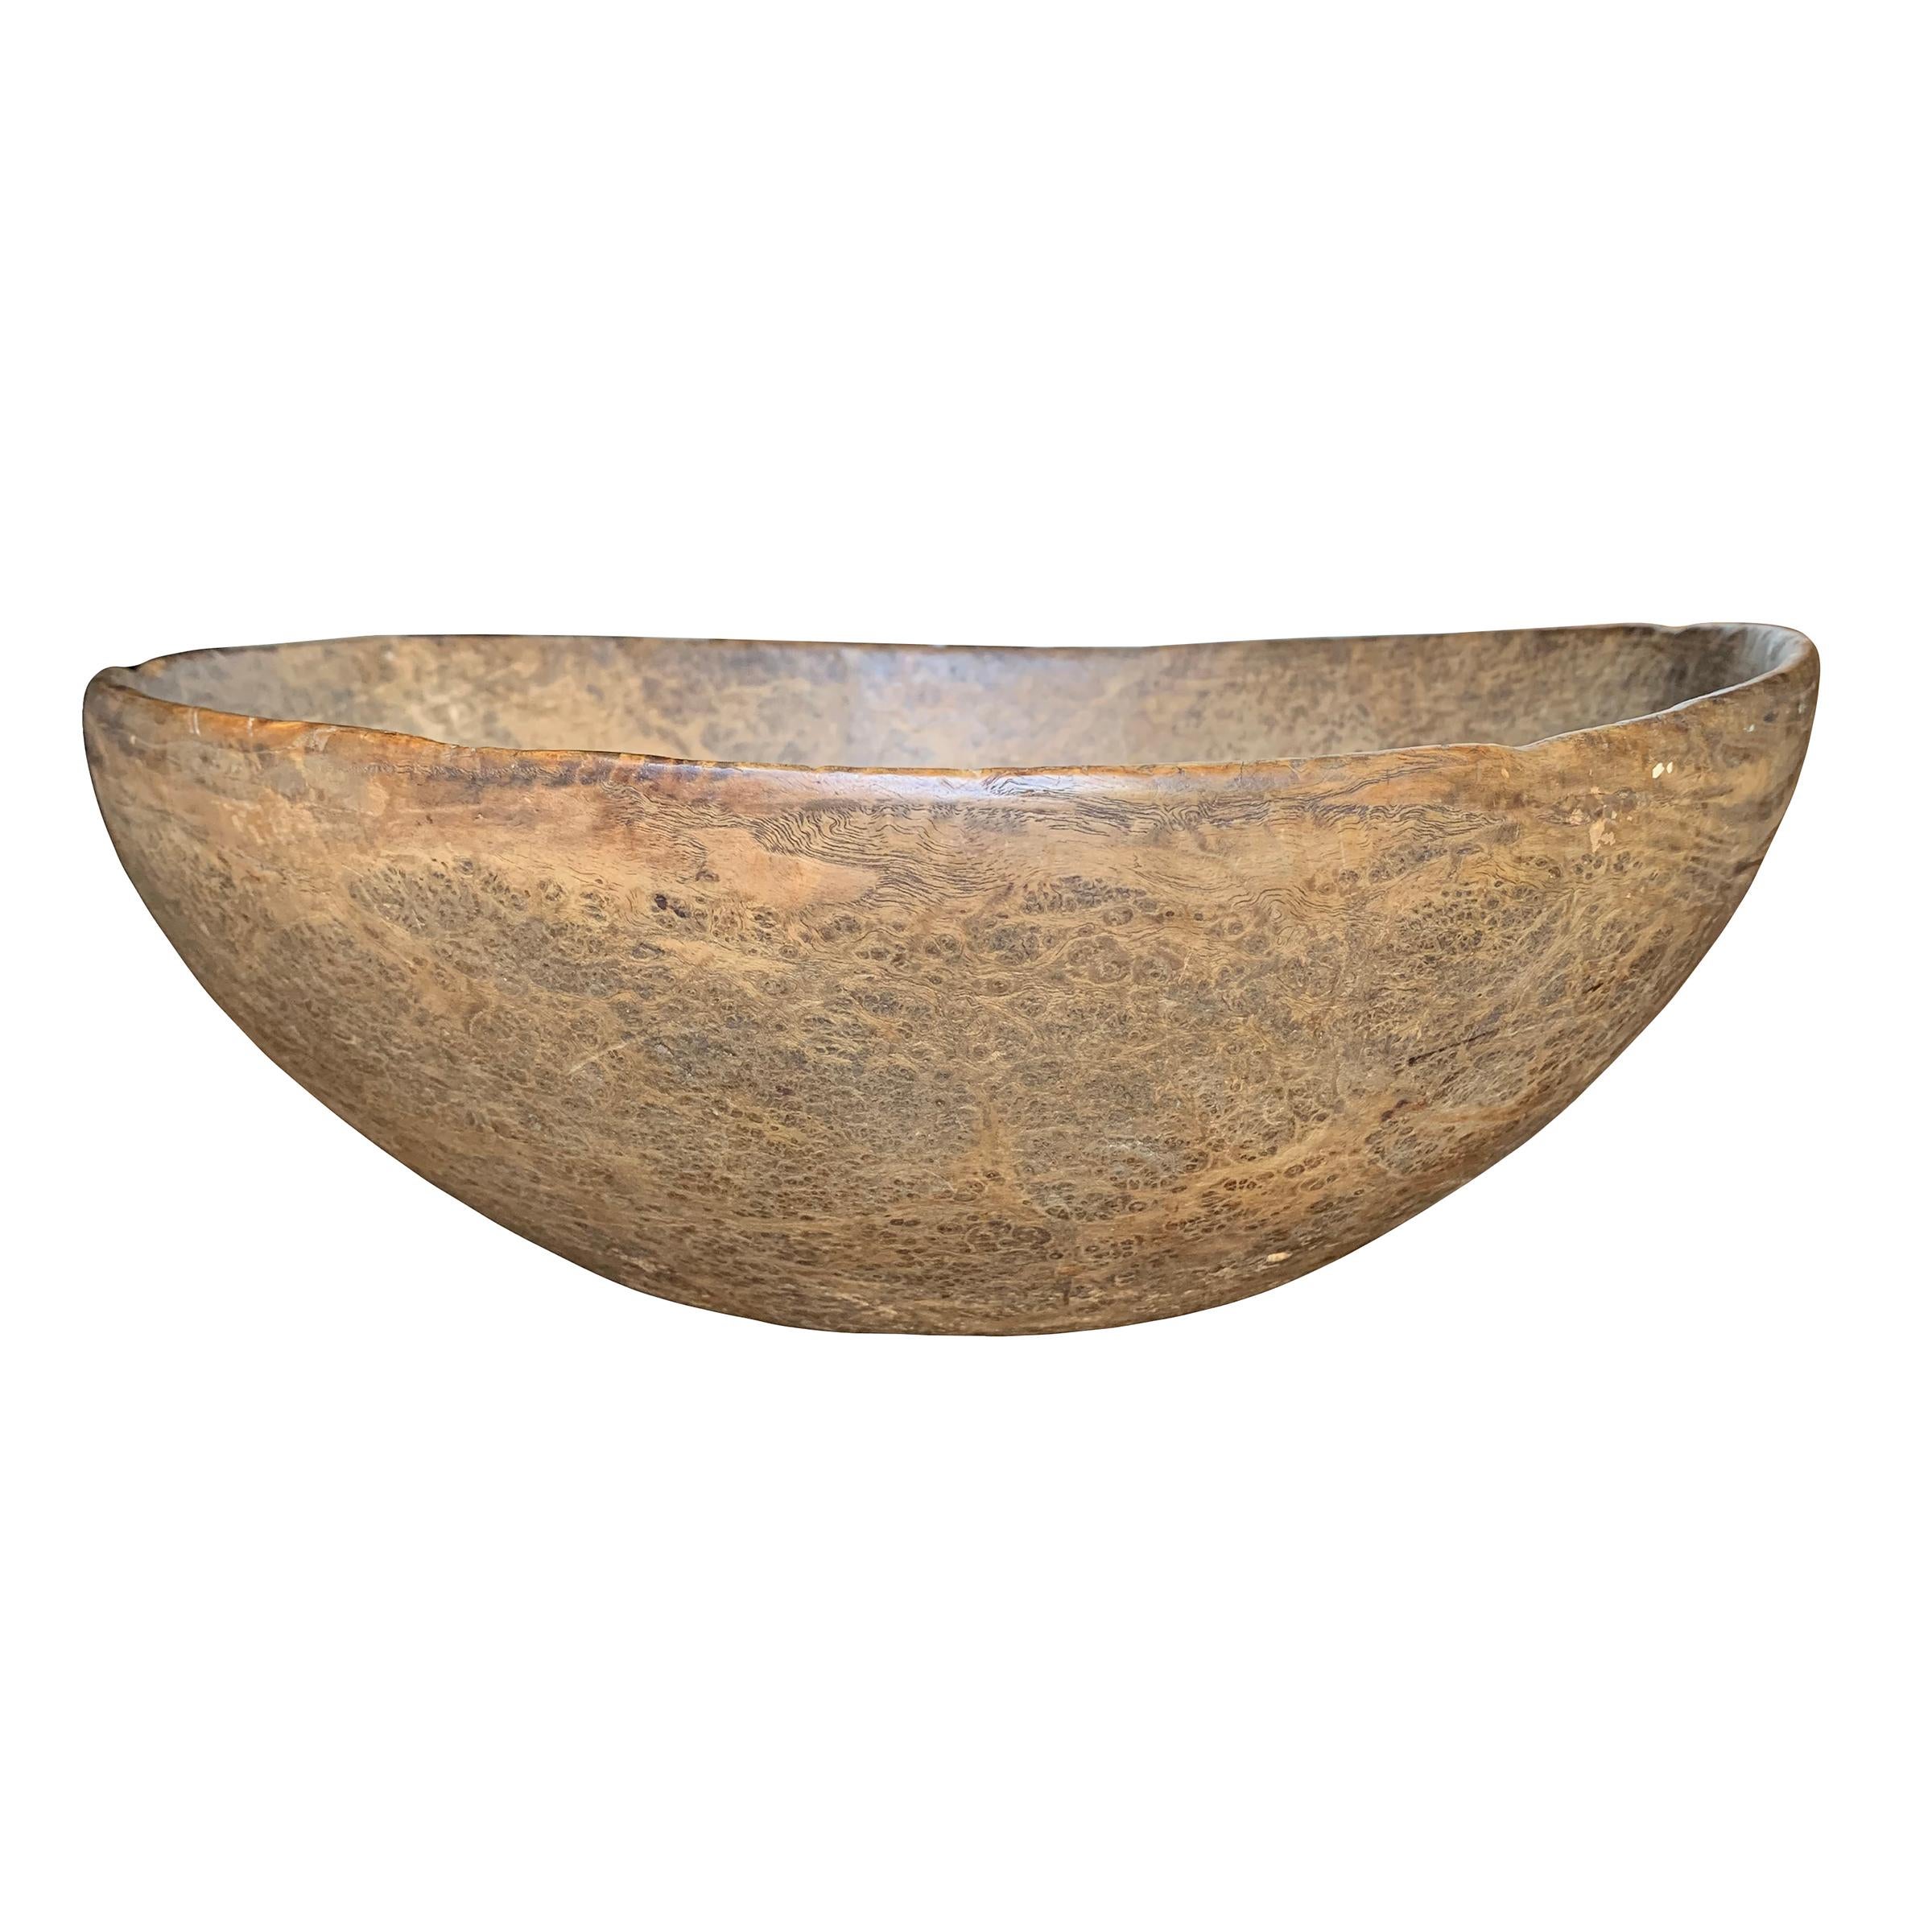 Primitive 18th Century Early American Ash Burl Bowl For Sale